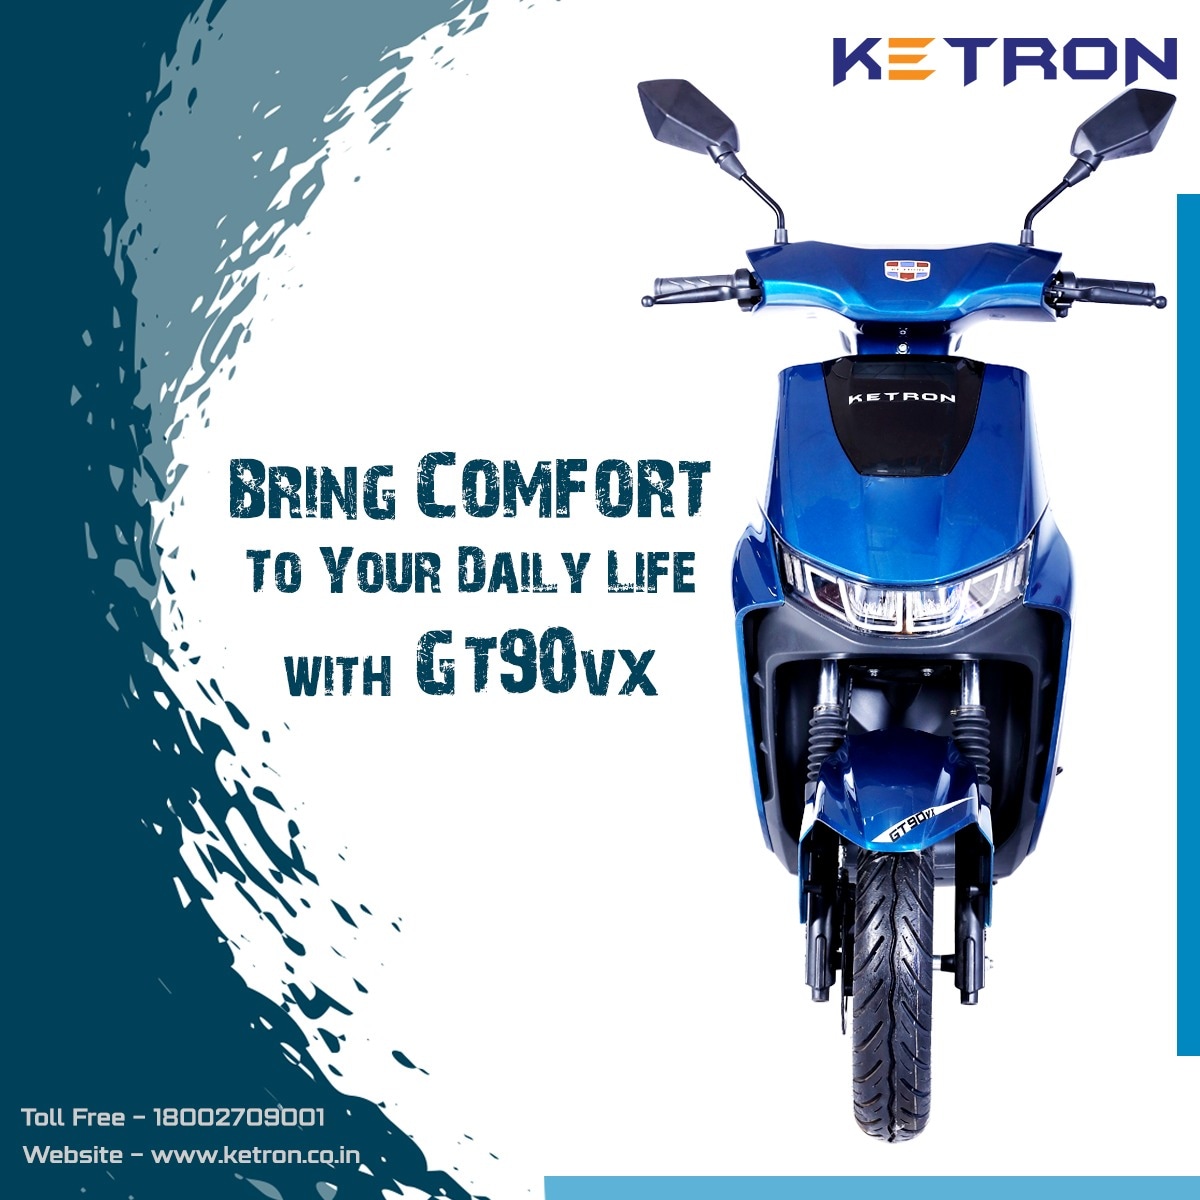 Enjoy your every ride with comfort !!
#ketron #ElectricVehicle #EV #ElectricScooty #chooseketron #GreenMobility #ChooseElectric #electricmobility #electricthefuture #comfortride